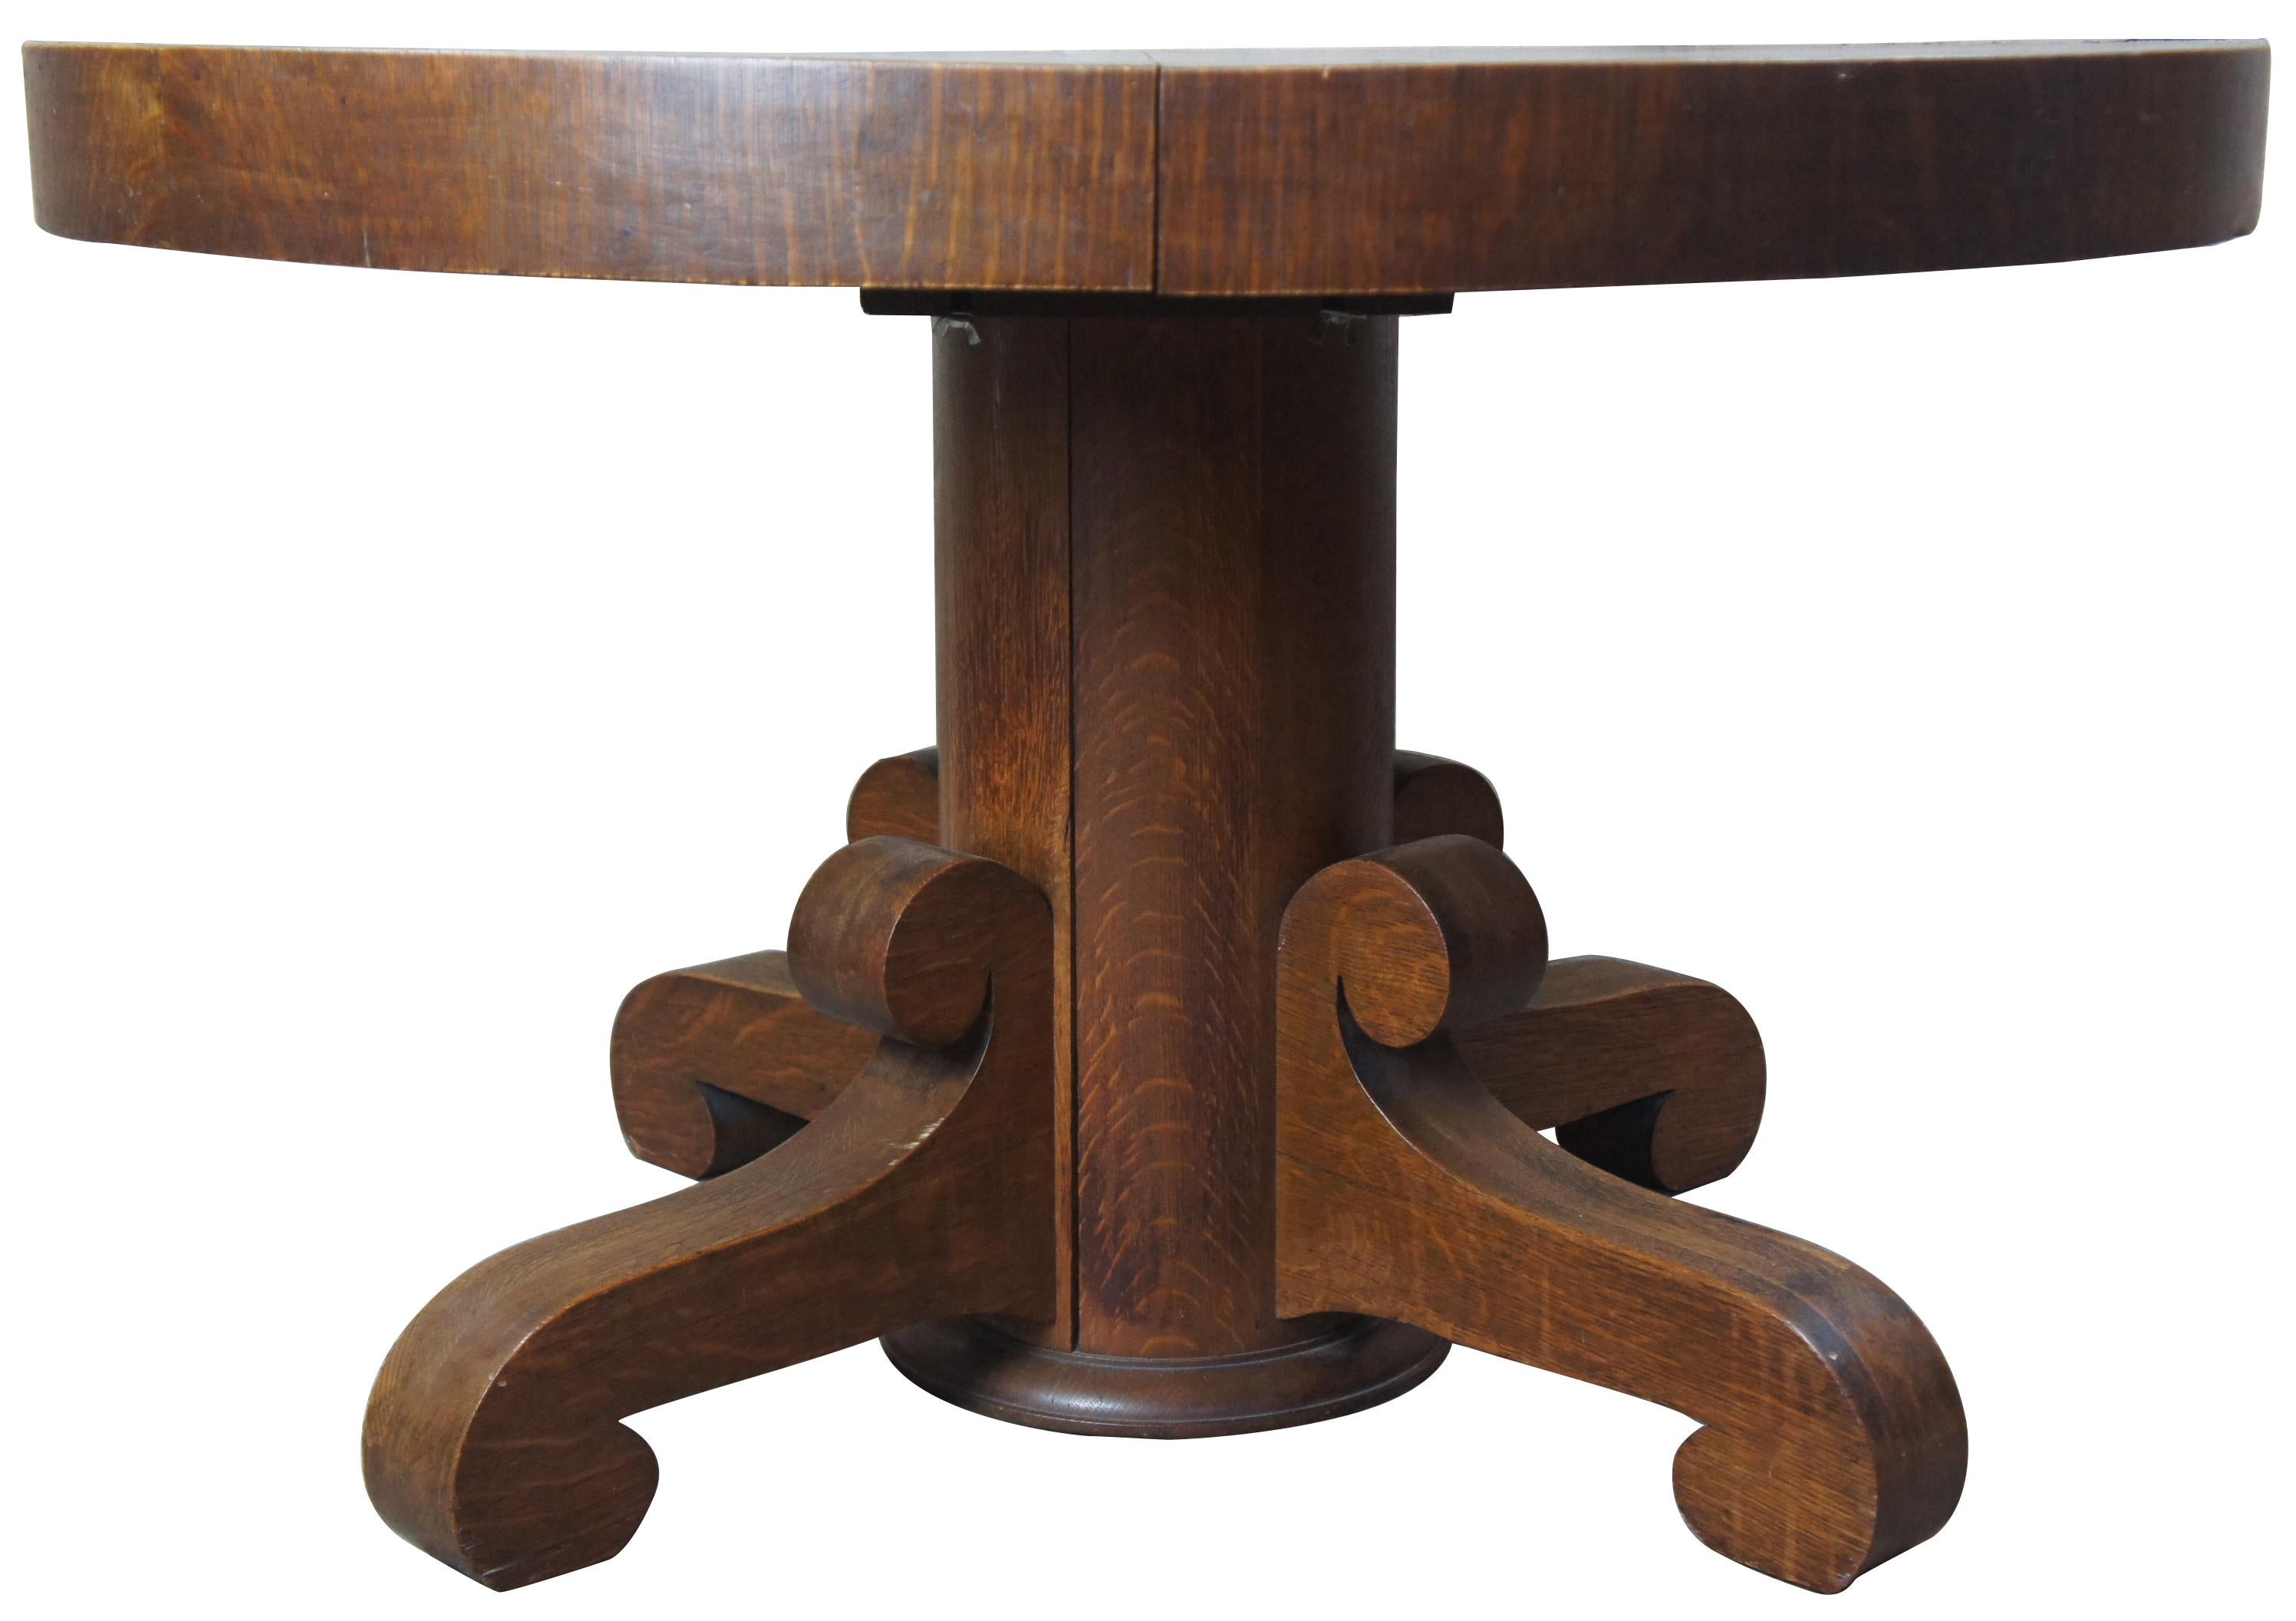 National Furniture Co antique Empire Quartersawn oak round dining table

Late Victorian Empire inspired dining table from National Furniture Company, circa 1900s. Made from quartersawn oak with scrolled feet. Includes 3 leafs for extension and